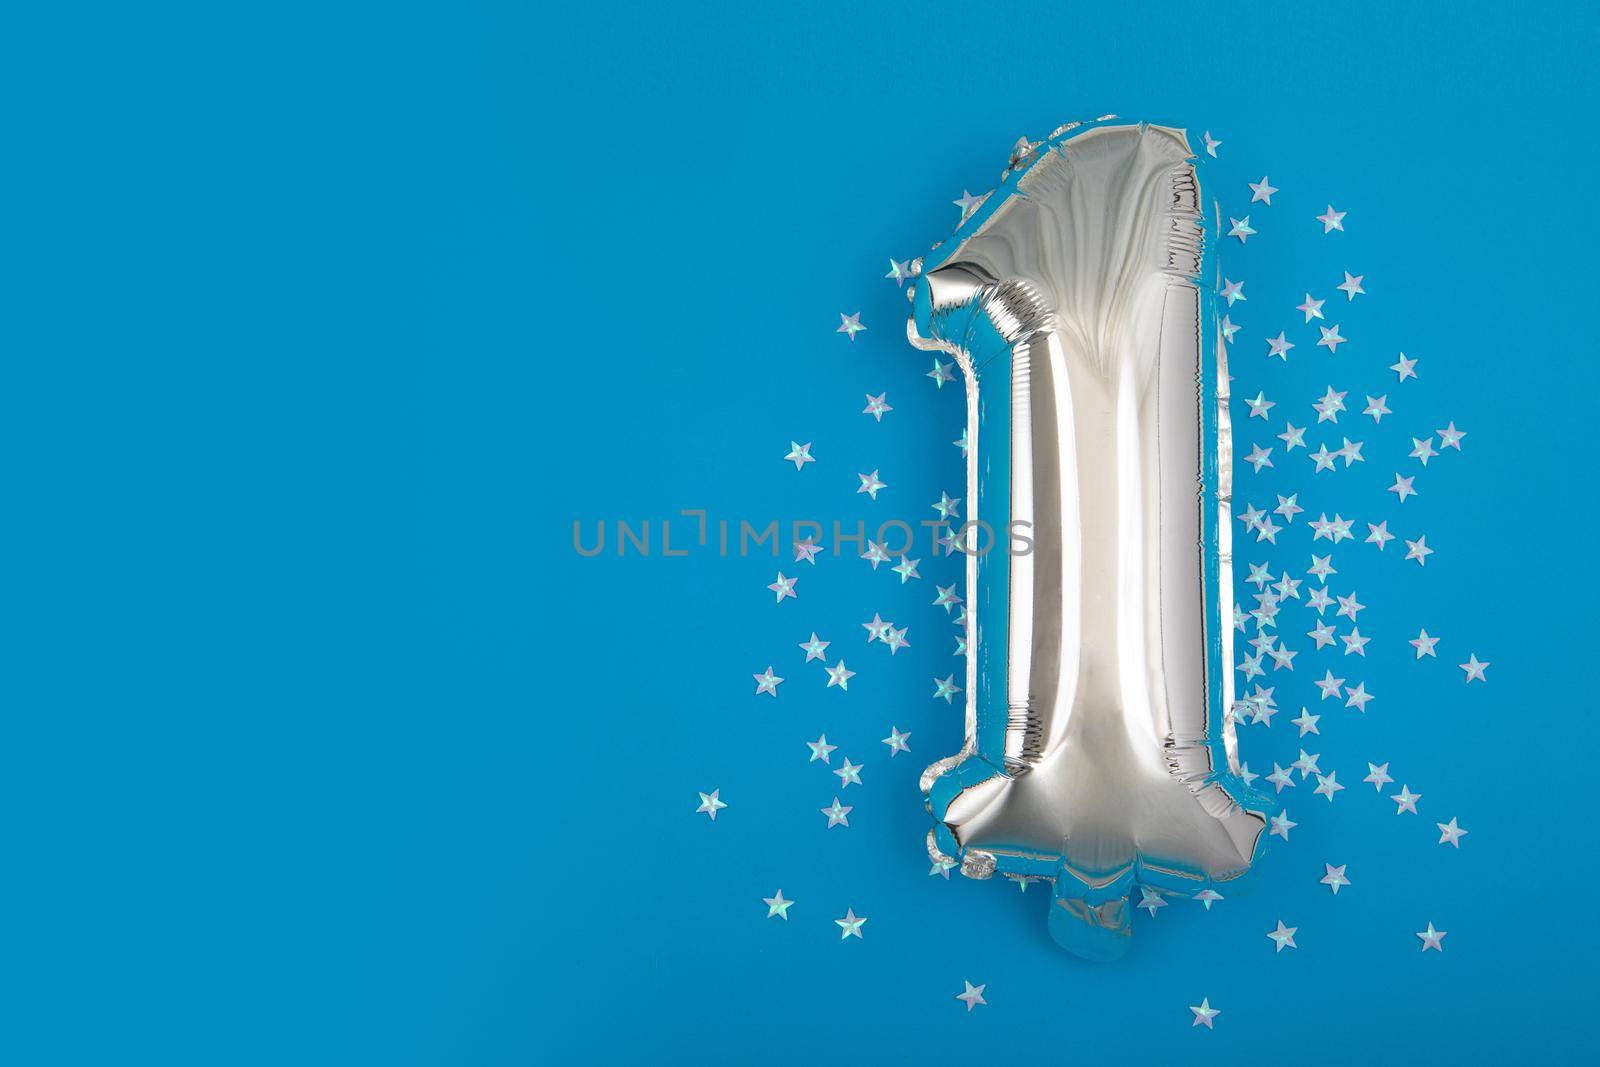 Silver balloon 1 on a blue background with confetti stars by Demkat